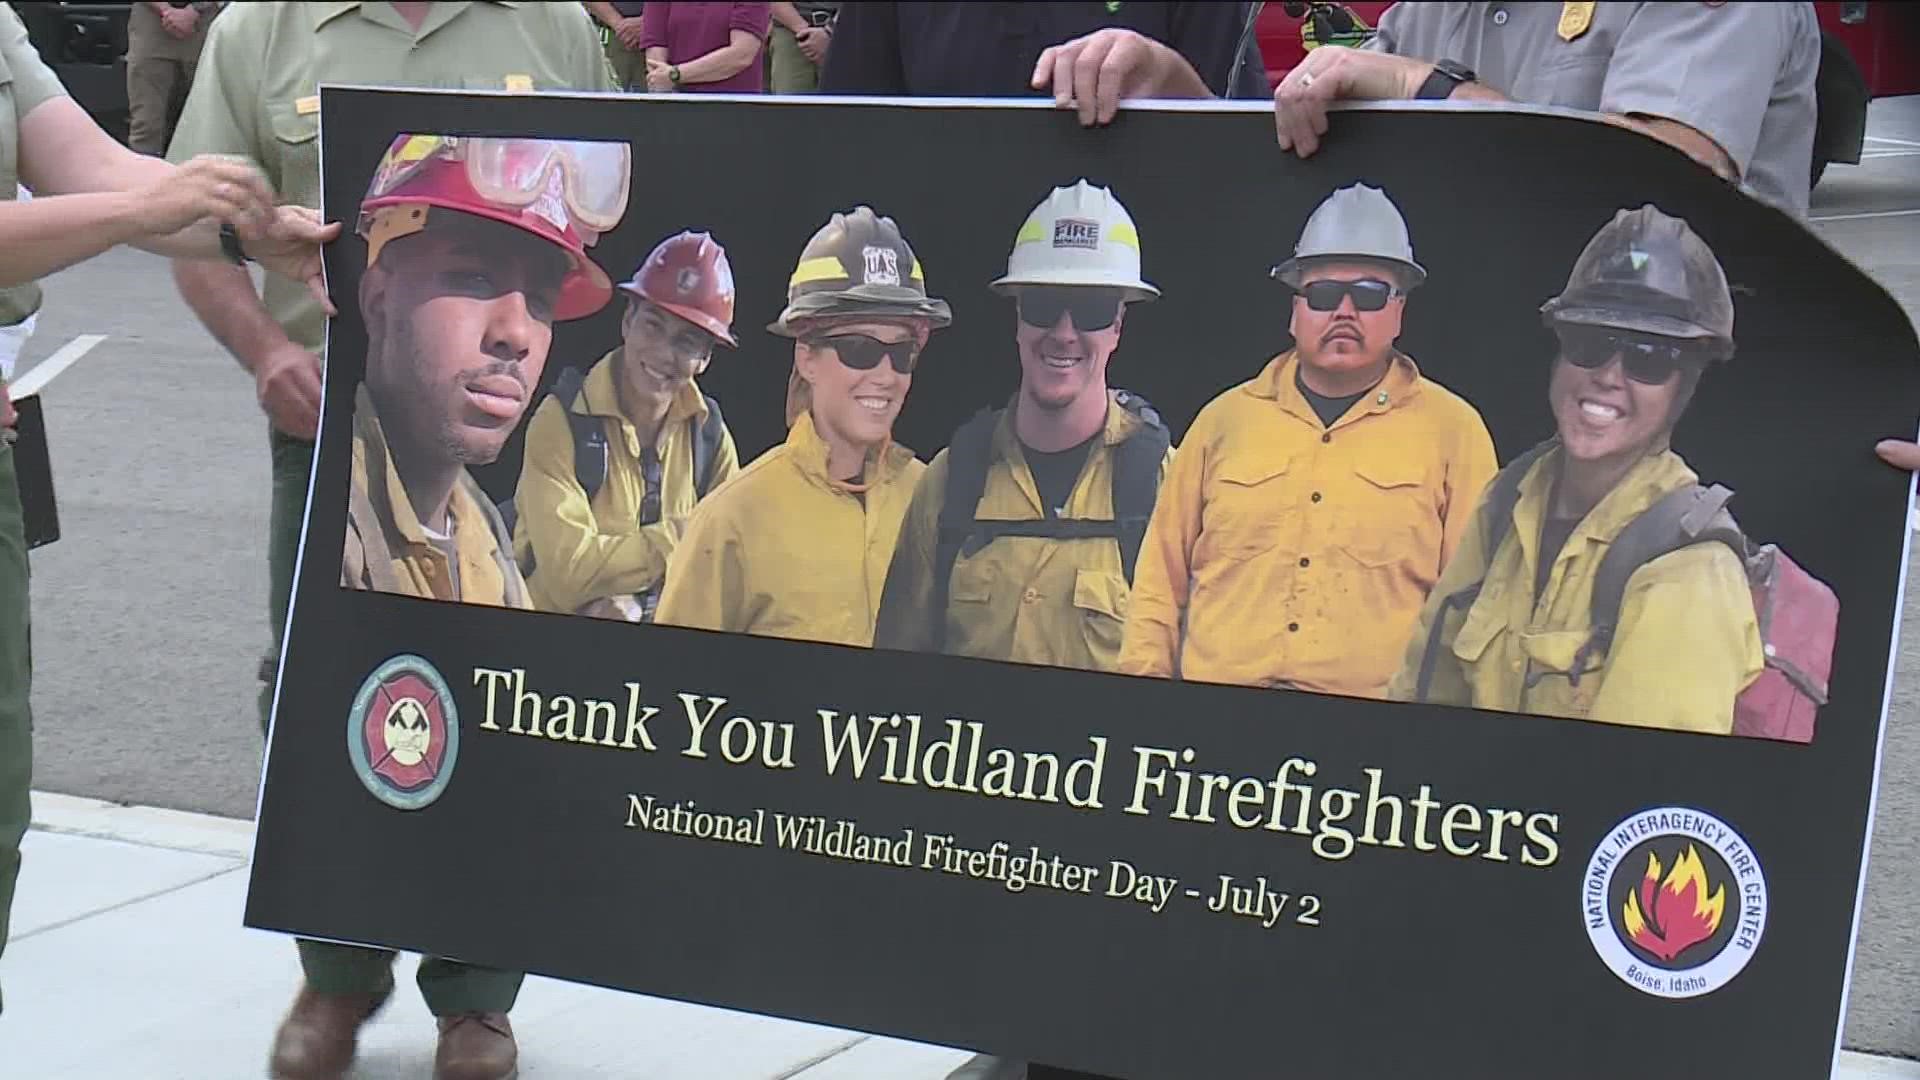 NIFC announced July 2 will officially be National Wildland Firefighter Day, during the Week of Remembrance.